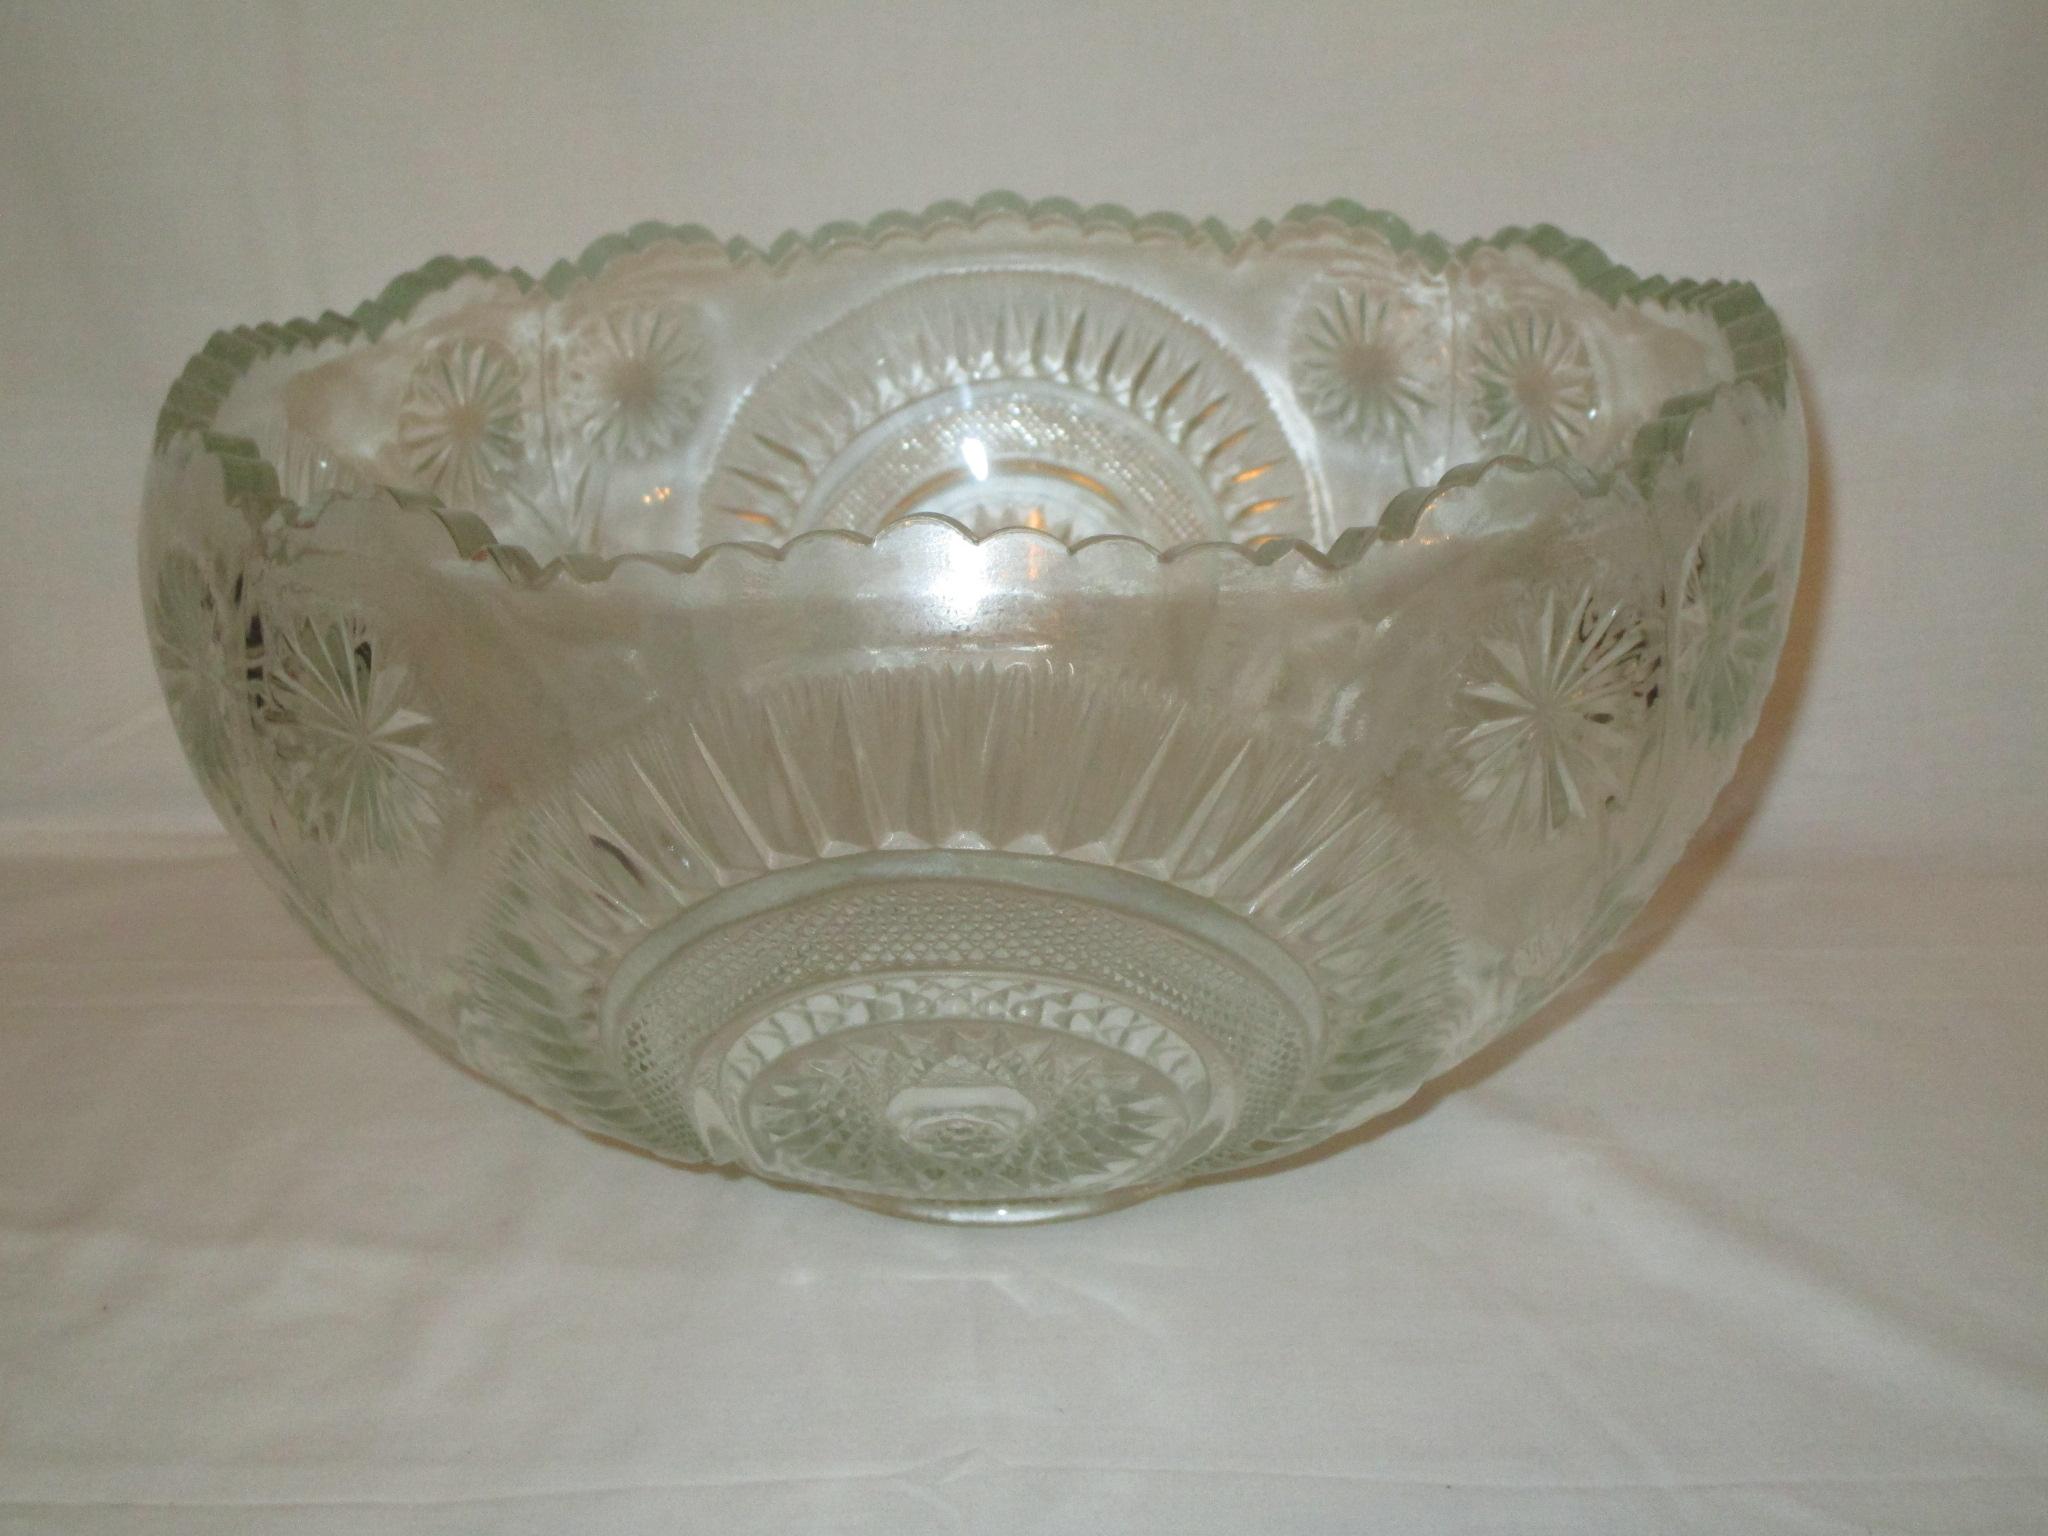 L. E. Smith Early American Pressed Glass Punch Bowl in the Pinwheel & Star Pattern